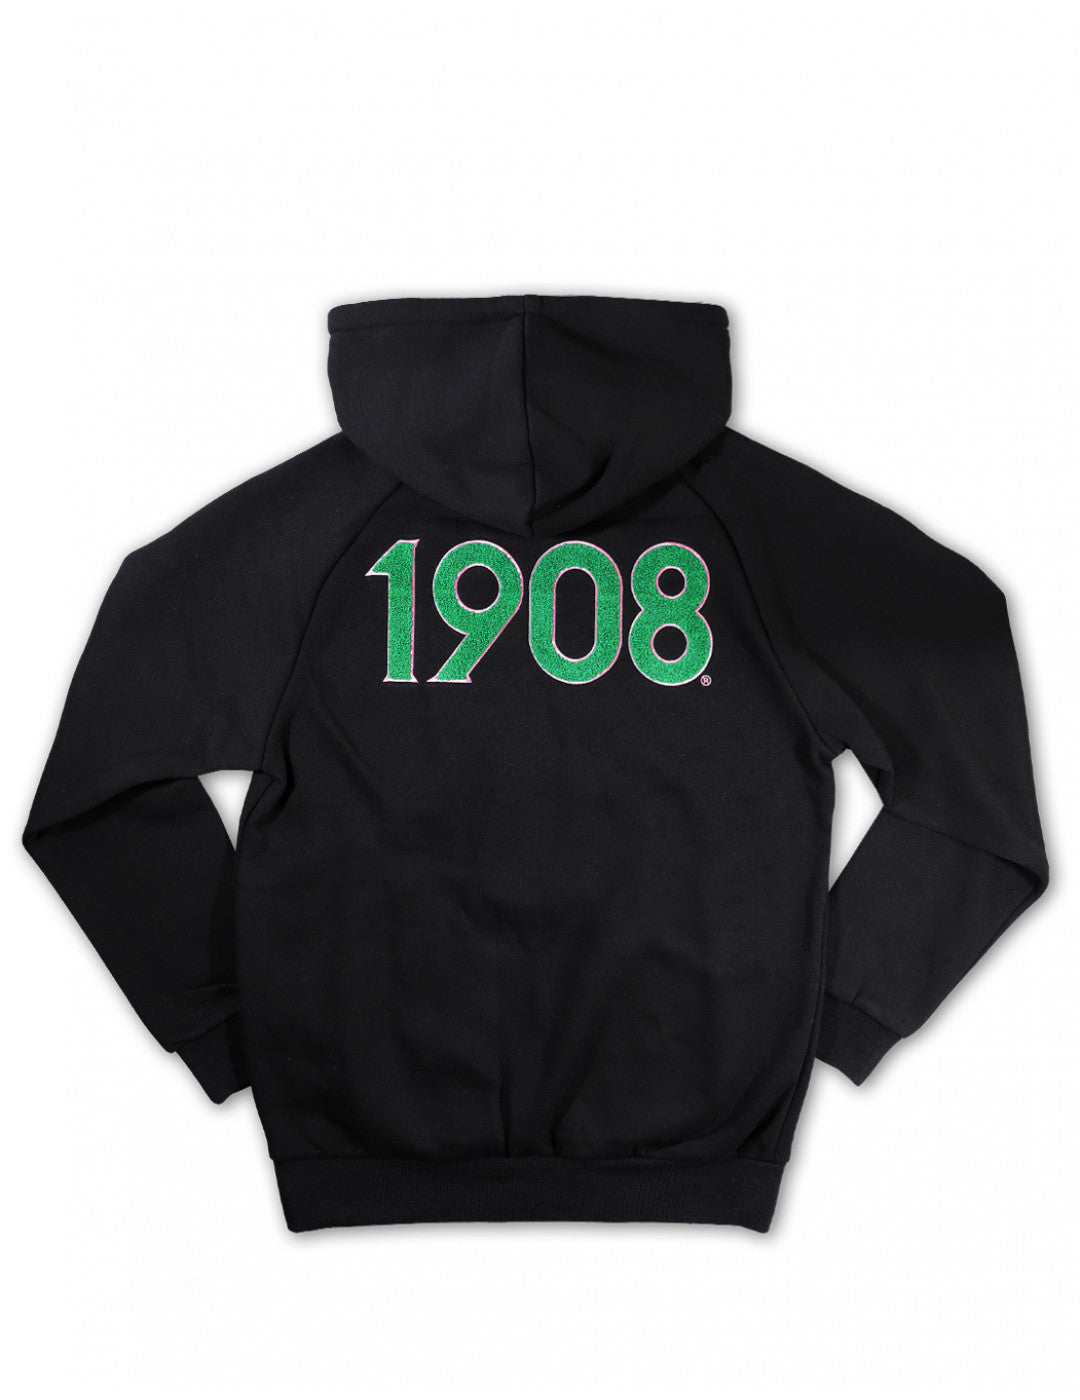 New 1908 Fall Chenille Hoodie